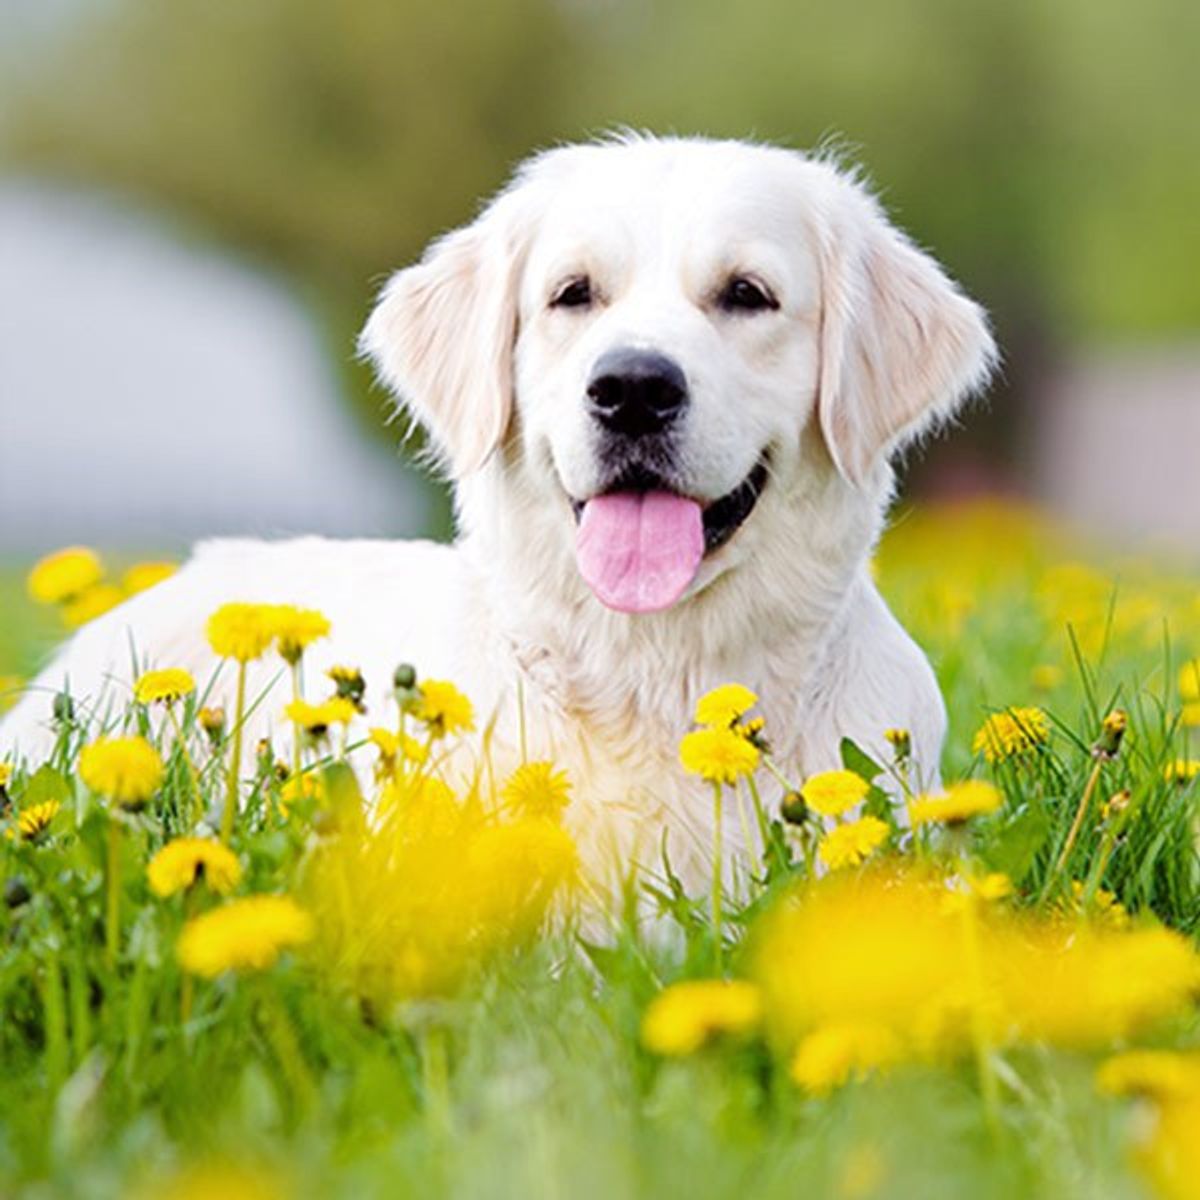 10 Fun Facts About Dogs